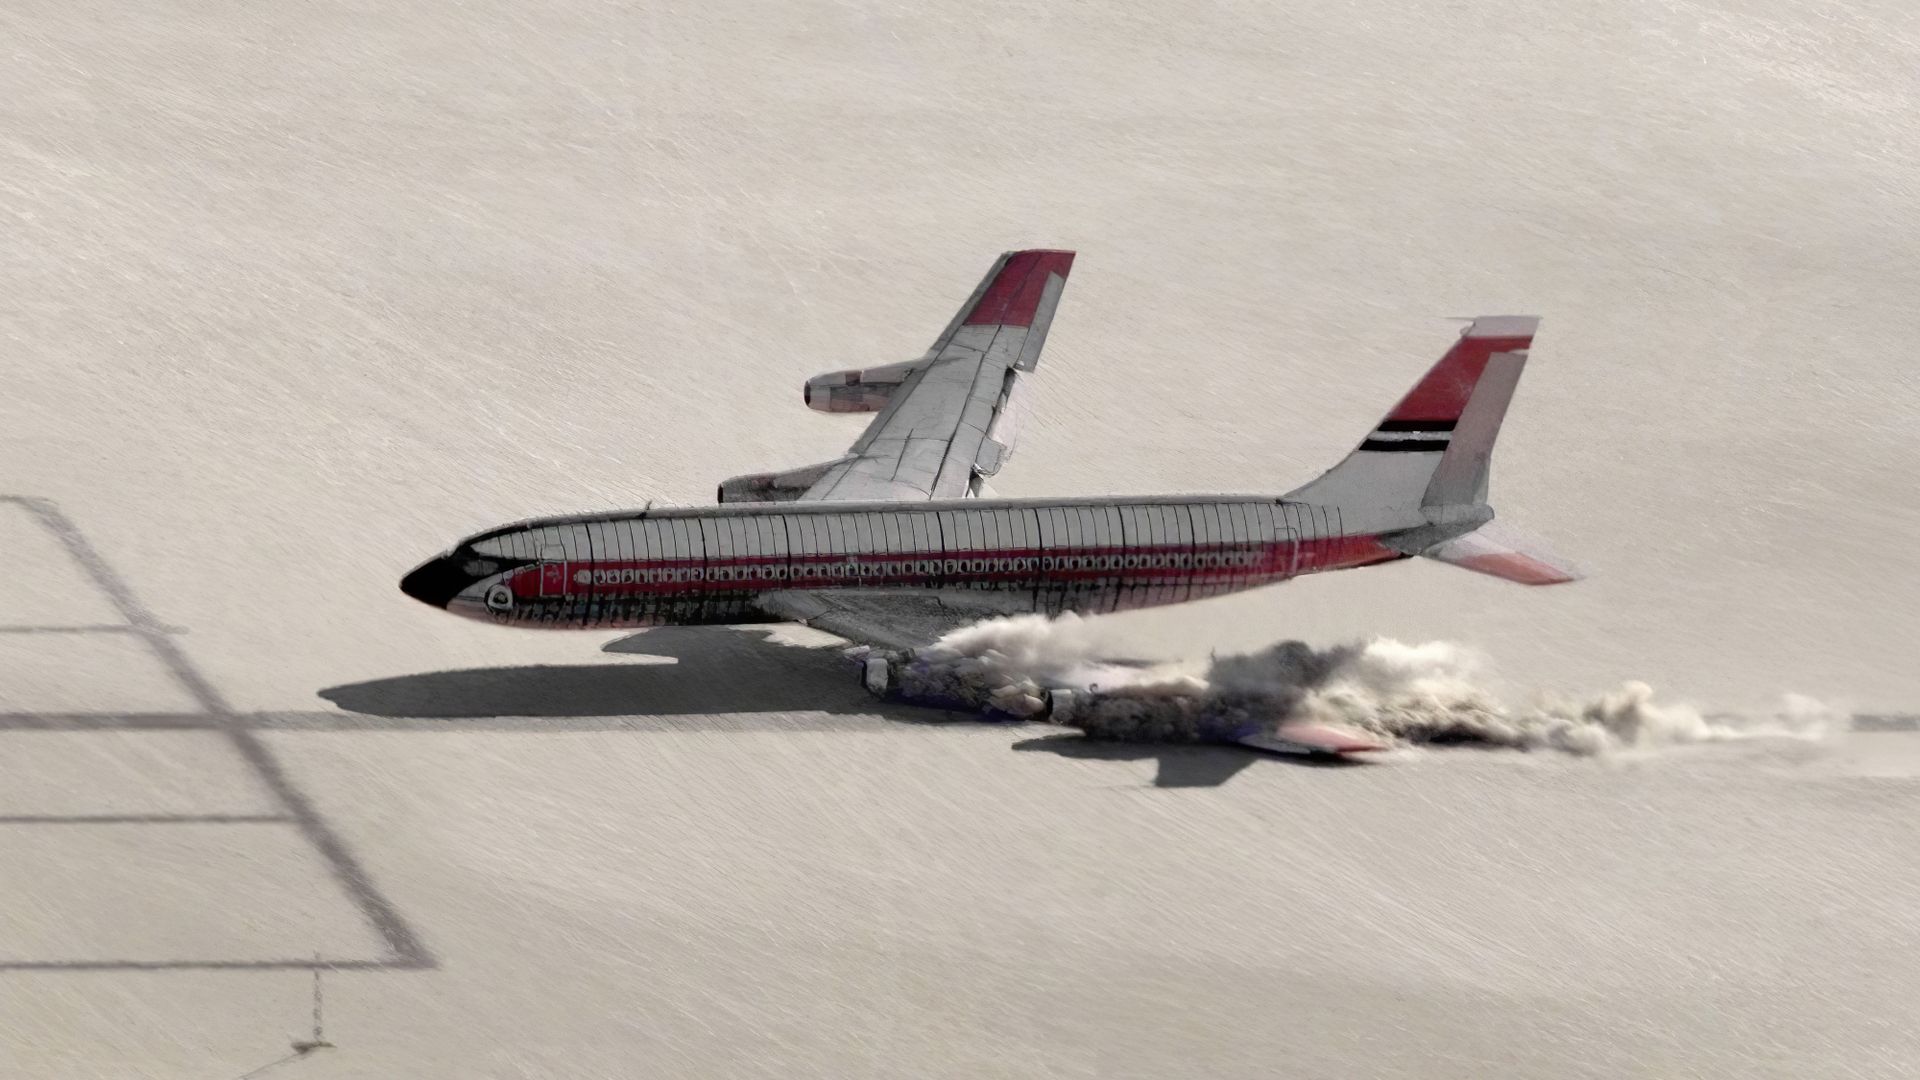 A remote and Intentional crash. Abstract circumstances borne of technology require the stage for measuring for smooth social acculturation. In 1984, a Boeing 720 was crashed, the aircraft is a slide-rule.